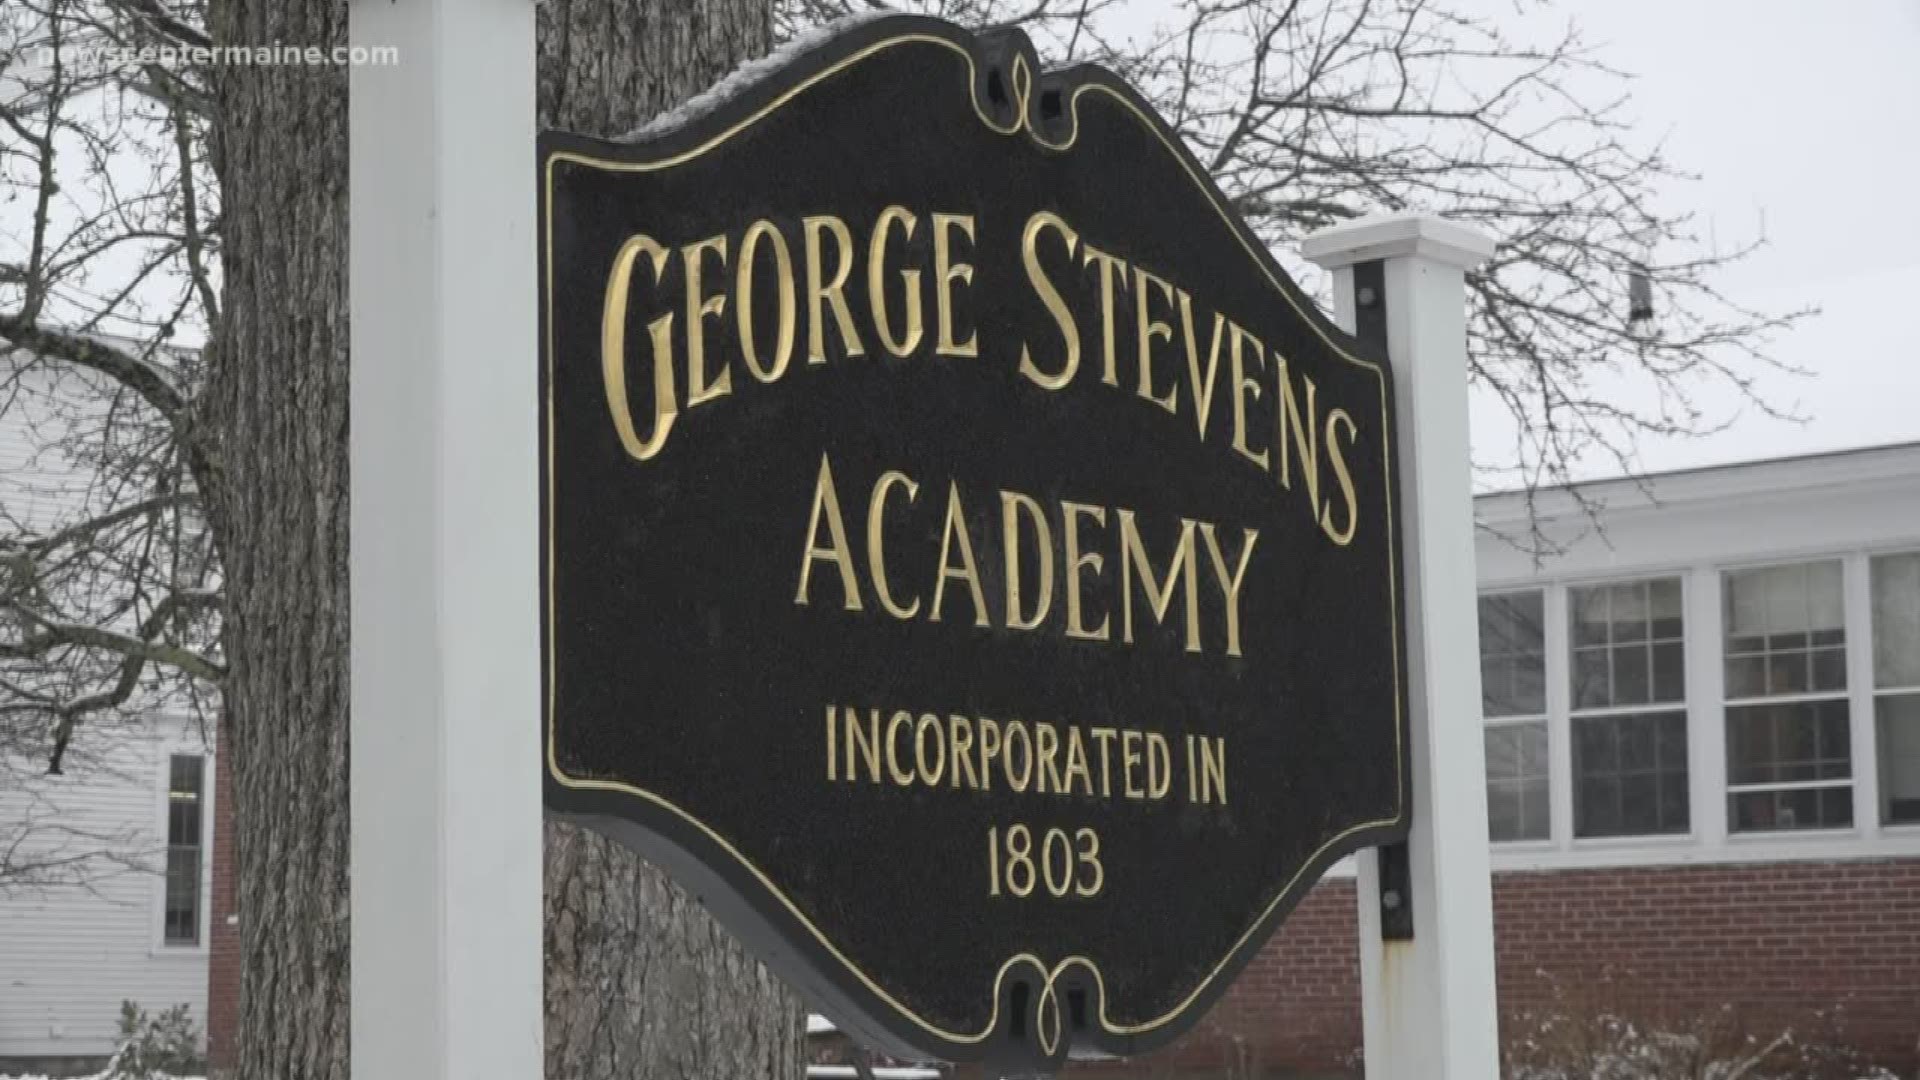 George Stevens Academy is taking precautions against the Coronavirus. Eight Chinese students will stay at the academy for February break instead of going home.